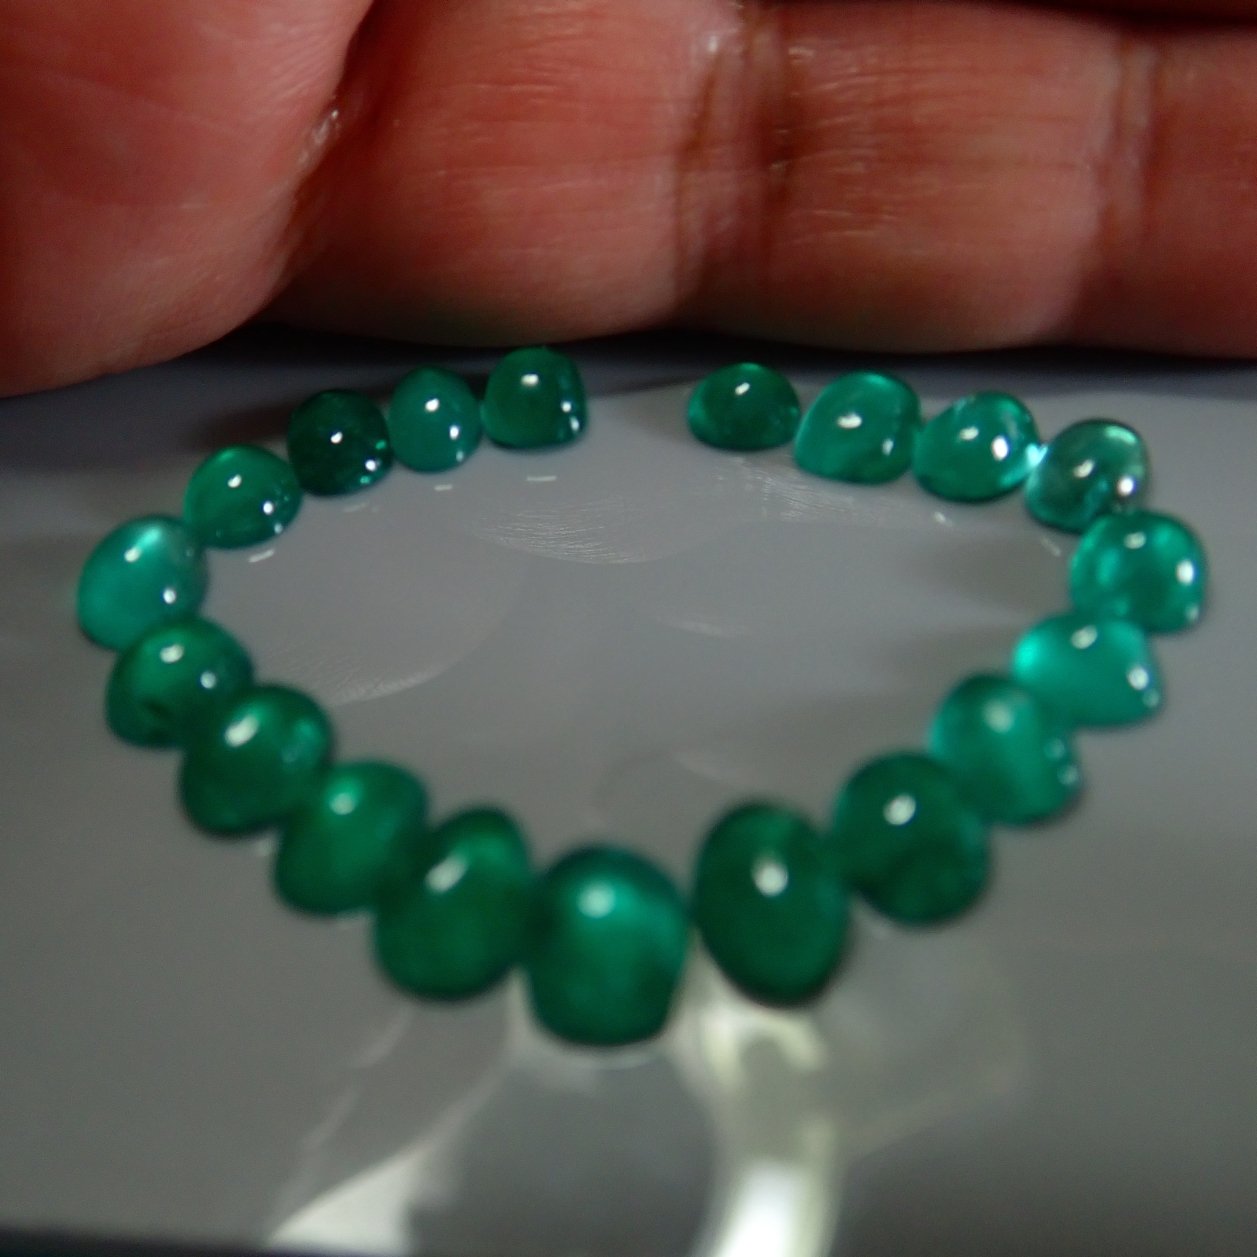 15.72ct Emerald Lot, Tanzania (near Zambia border, almost identical to Zambian material) Untreated Unheated NO OIL. 0.50CT-1.32CT-Gems Of East Africa